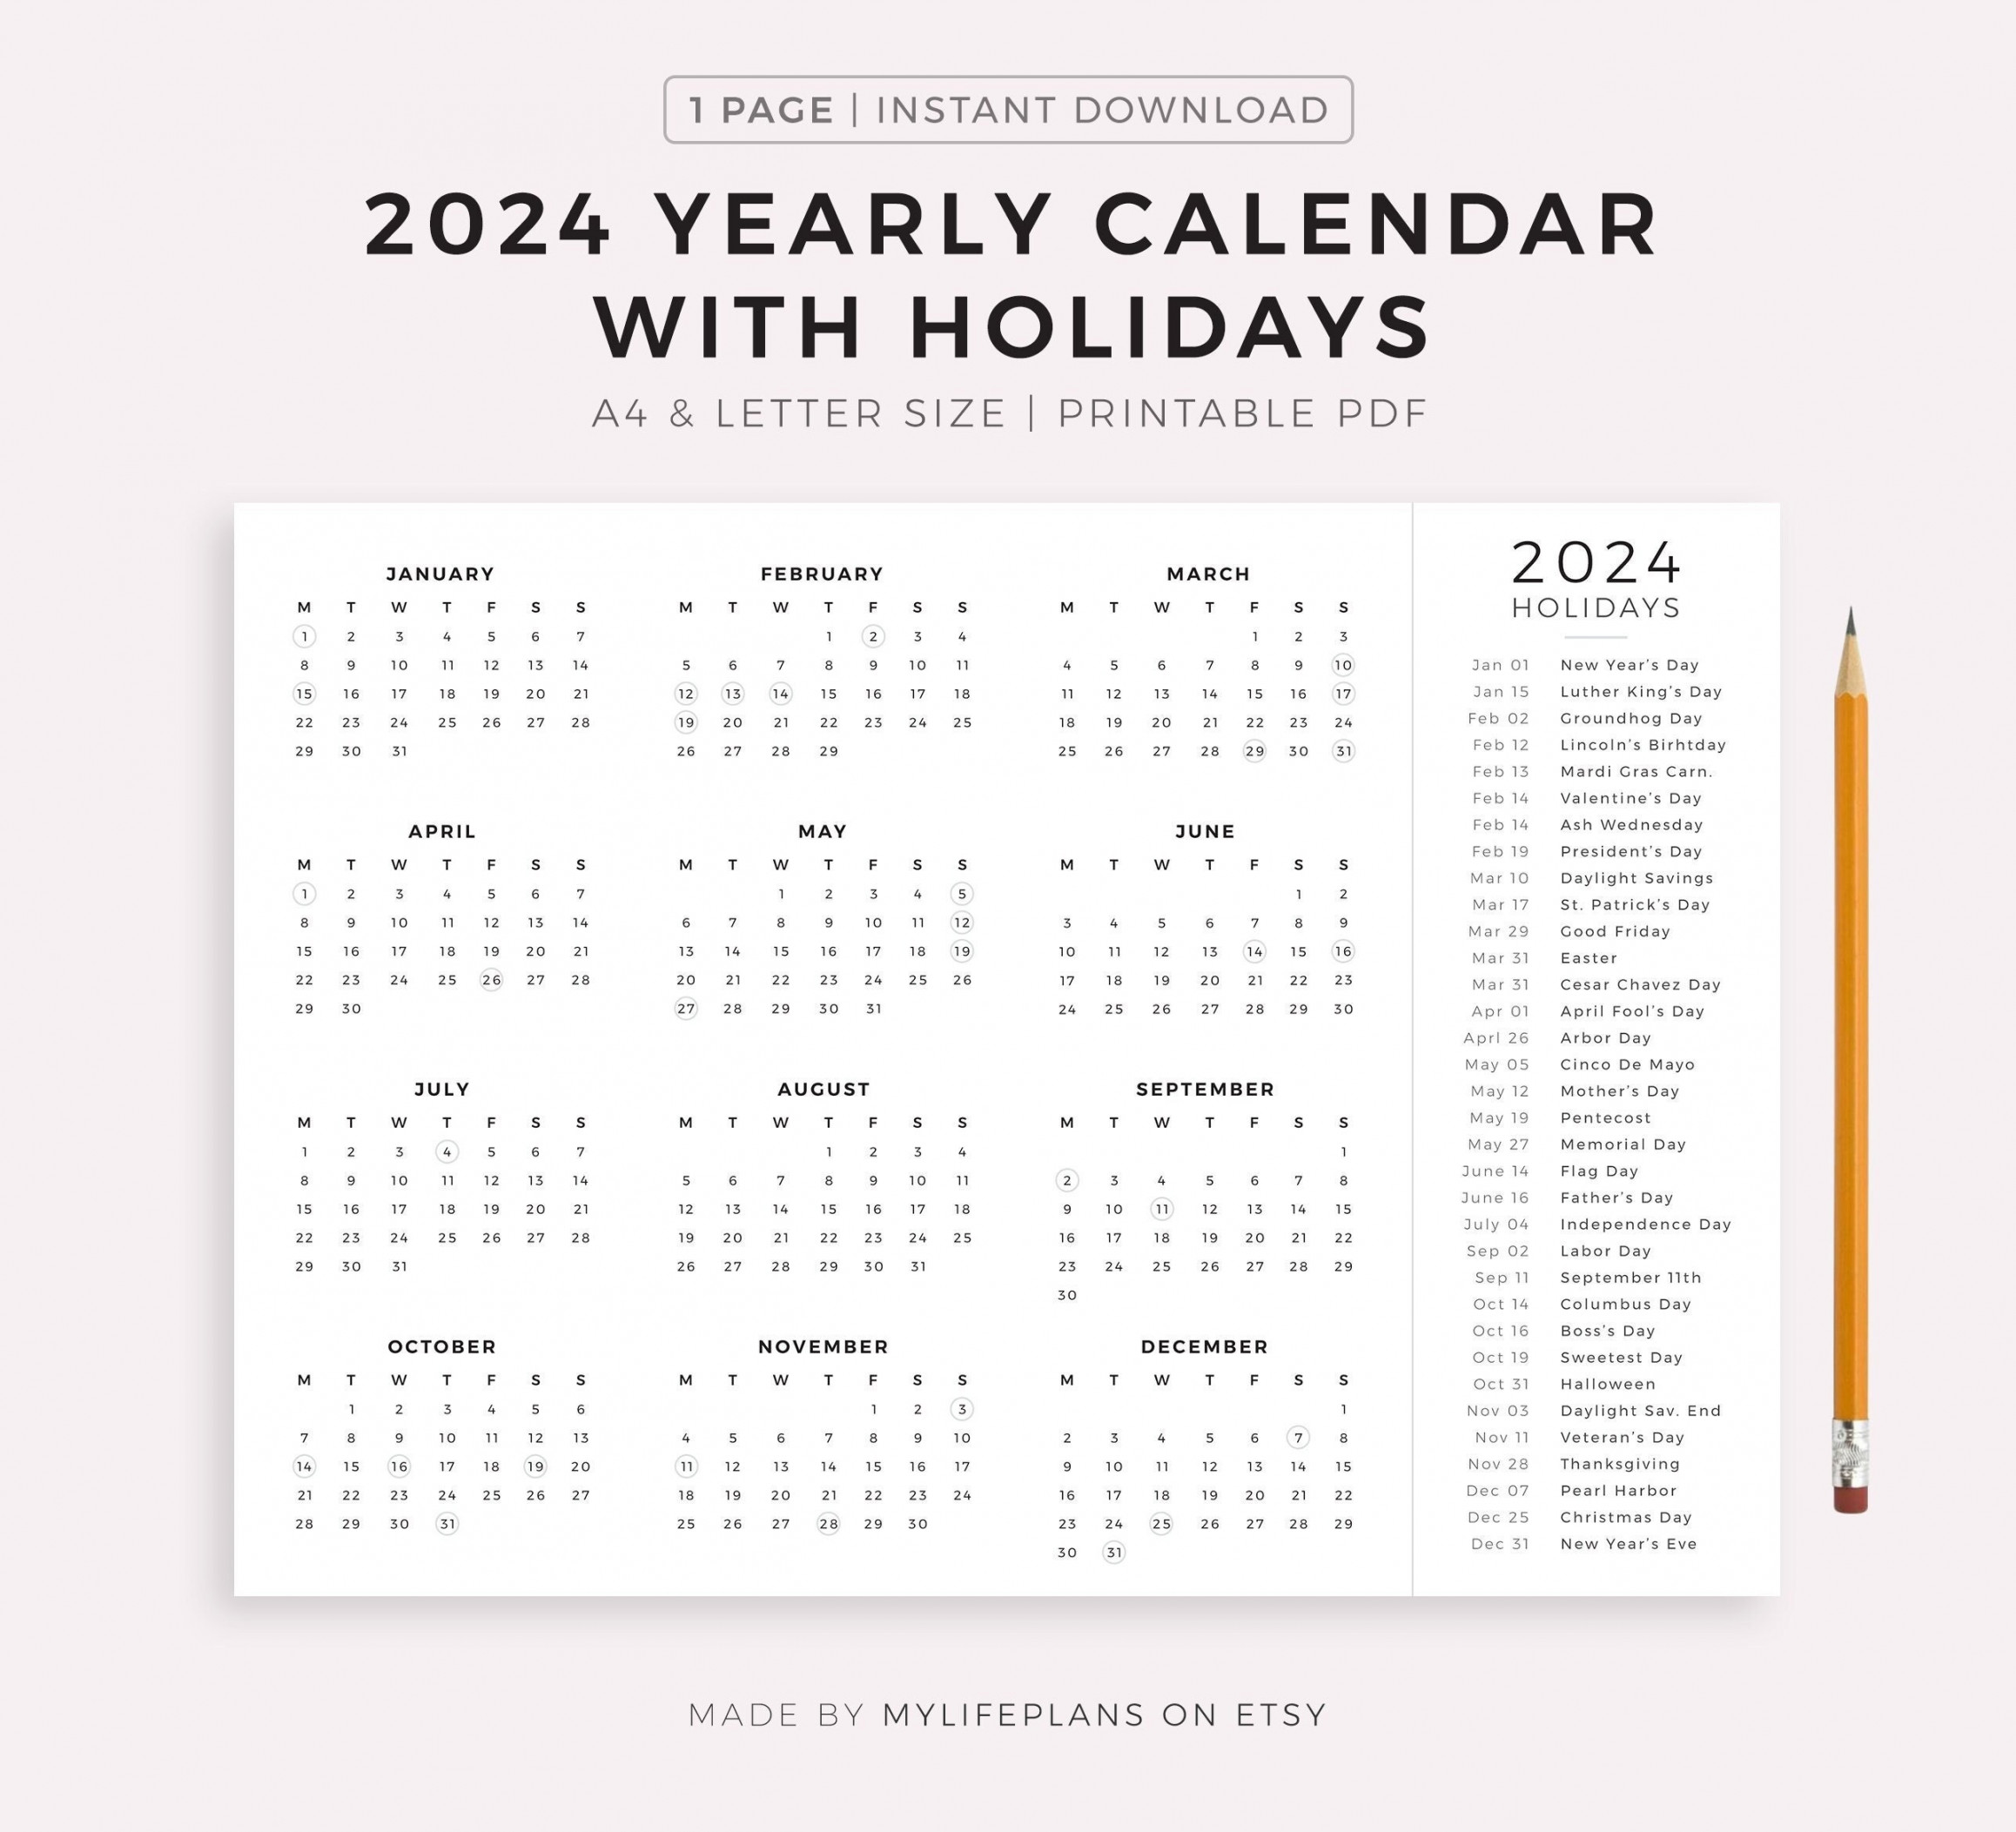 Year Calendar With Holidays on One Page Printable - Etsy Israel